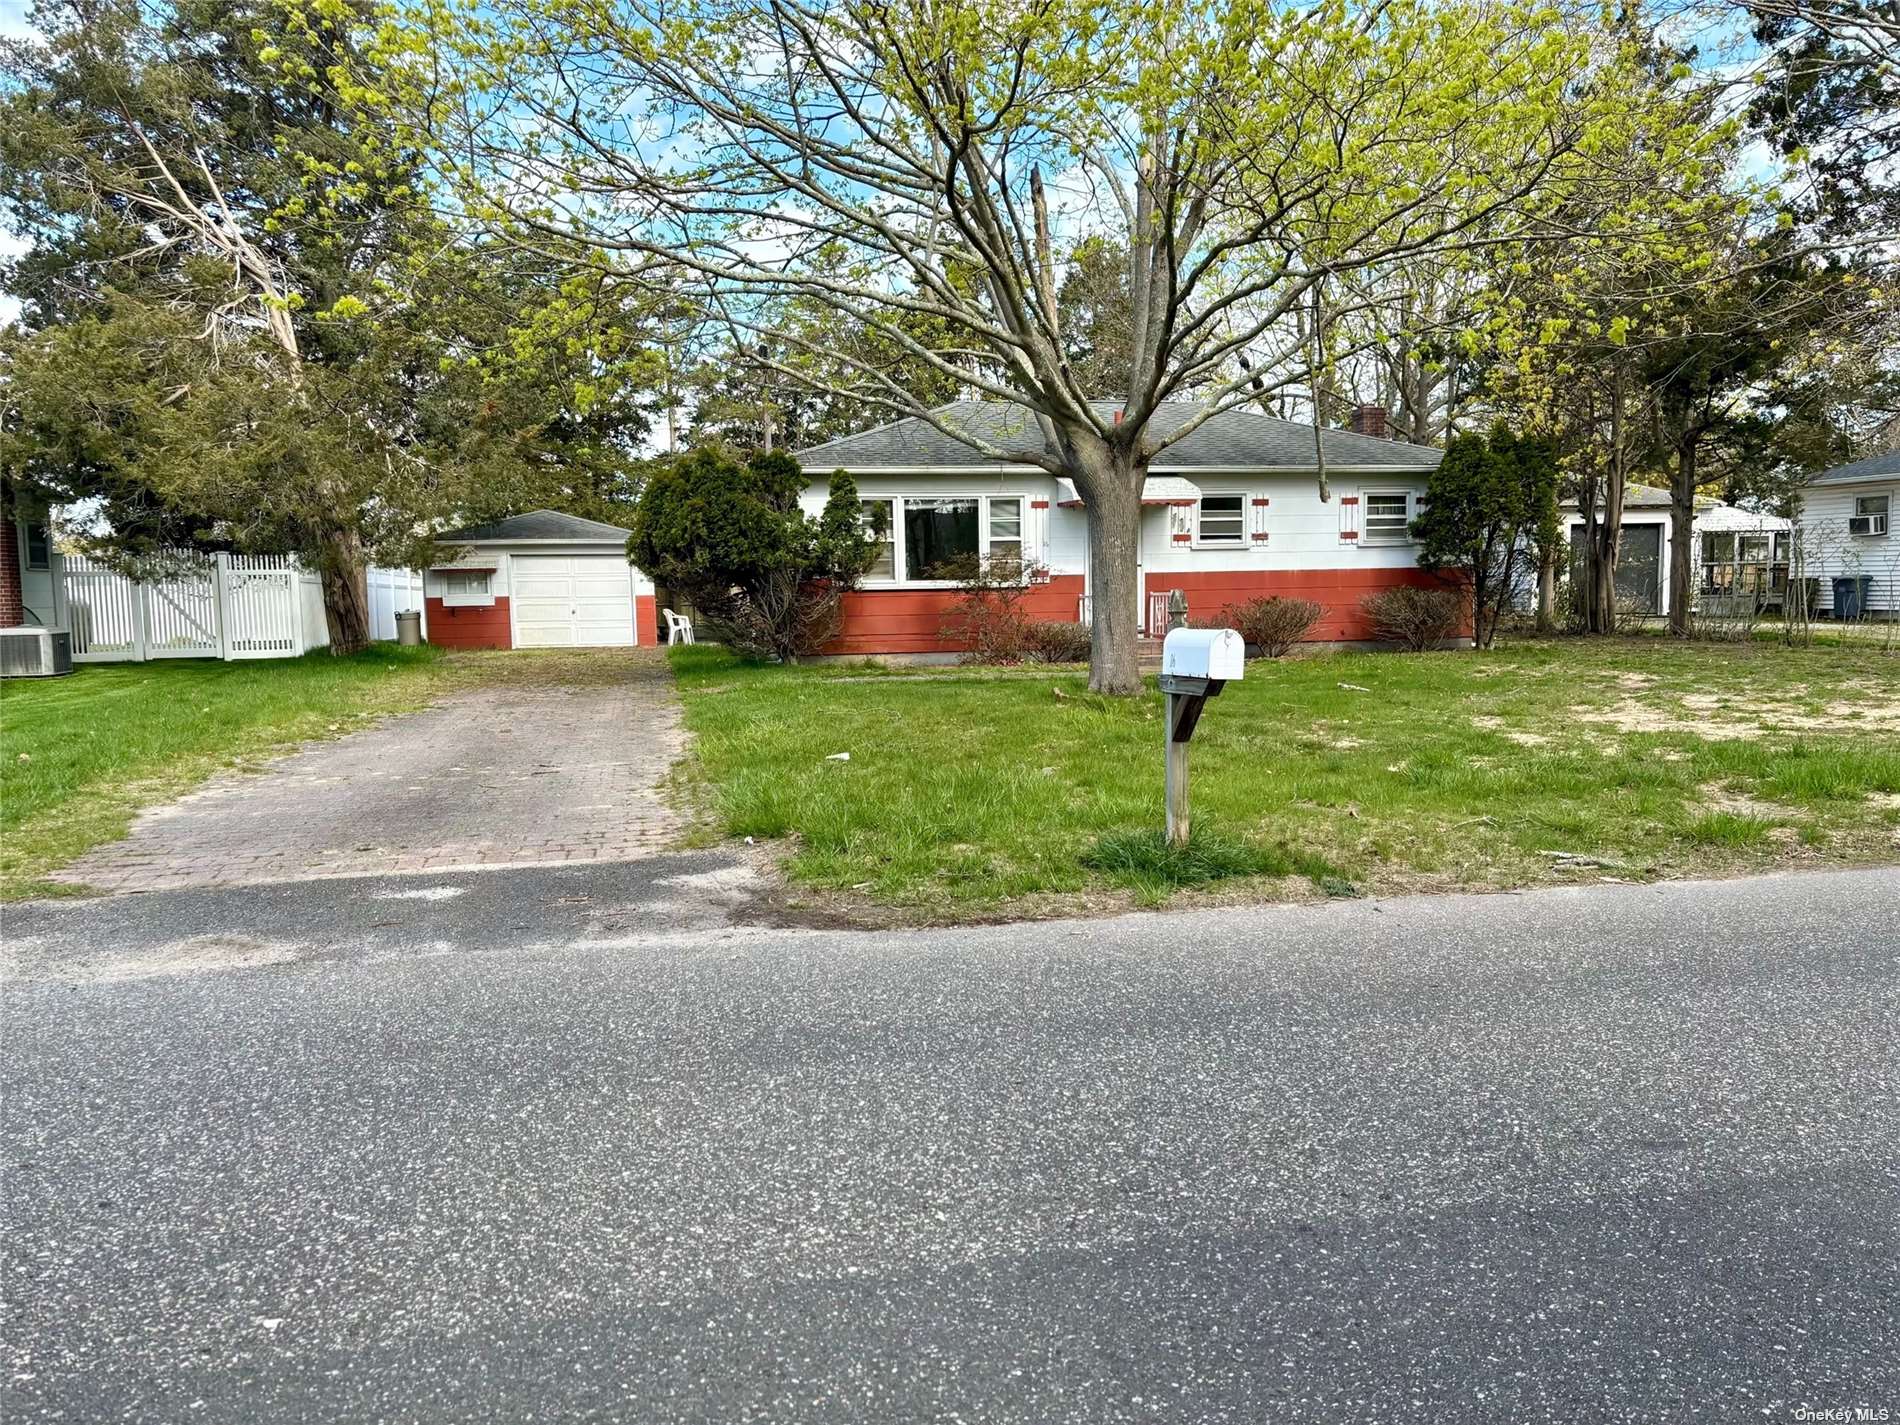 Listing in Center Moriches, NY